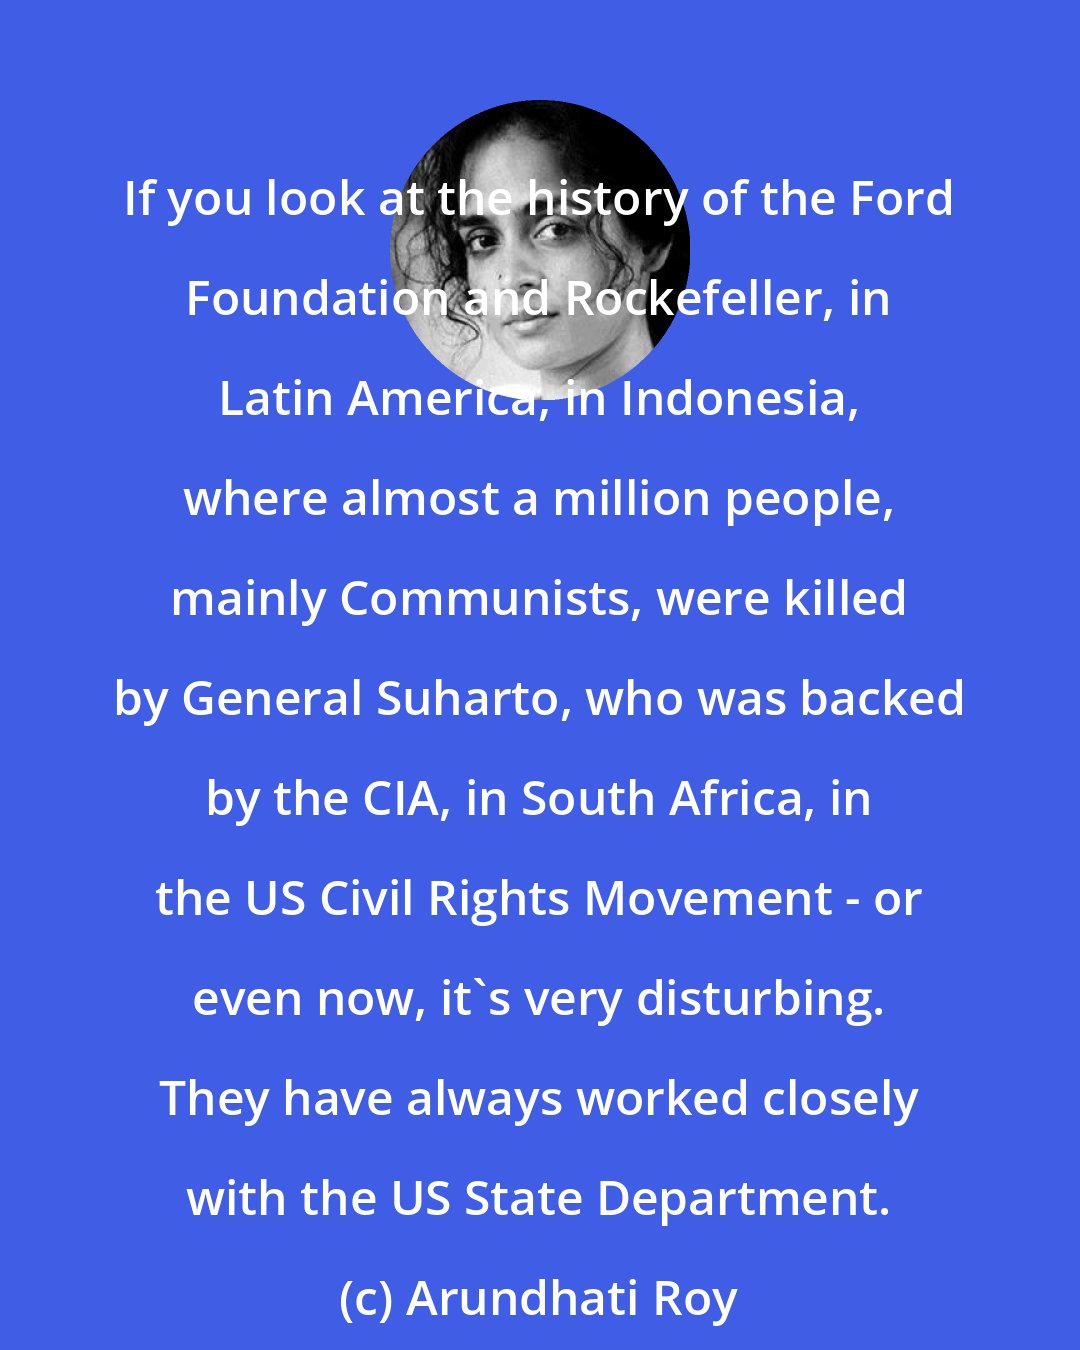 Arundhati Roy: If you look at the history of the Ford Foundation and Rockefeller, in Latin America, in Indonesia, where almost a million people, mainly Communists, were killed by General Suharto, who was backed by the CIA, in South Africa, in the US Civil Rights Movement - or even now, it's very disturbing. They have always worked closely with the US State Department.